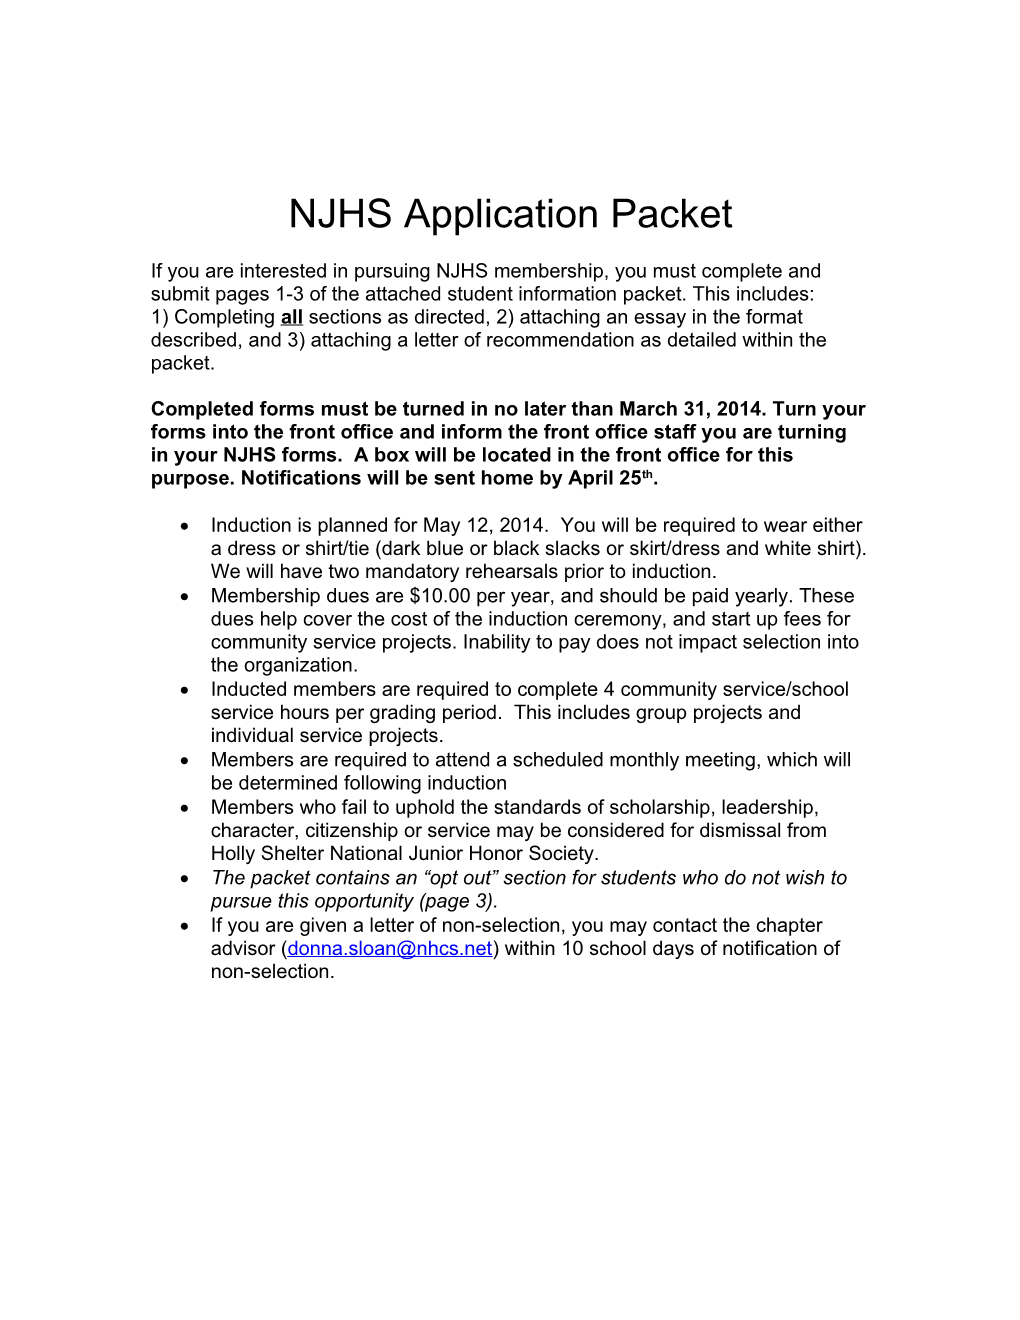 NJHS Application Packet